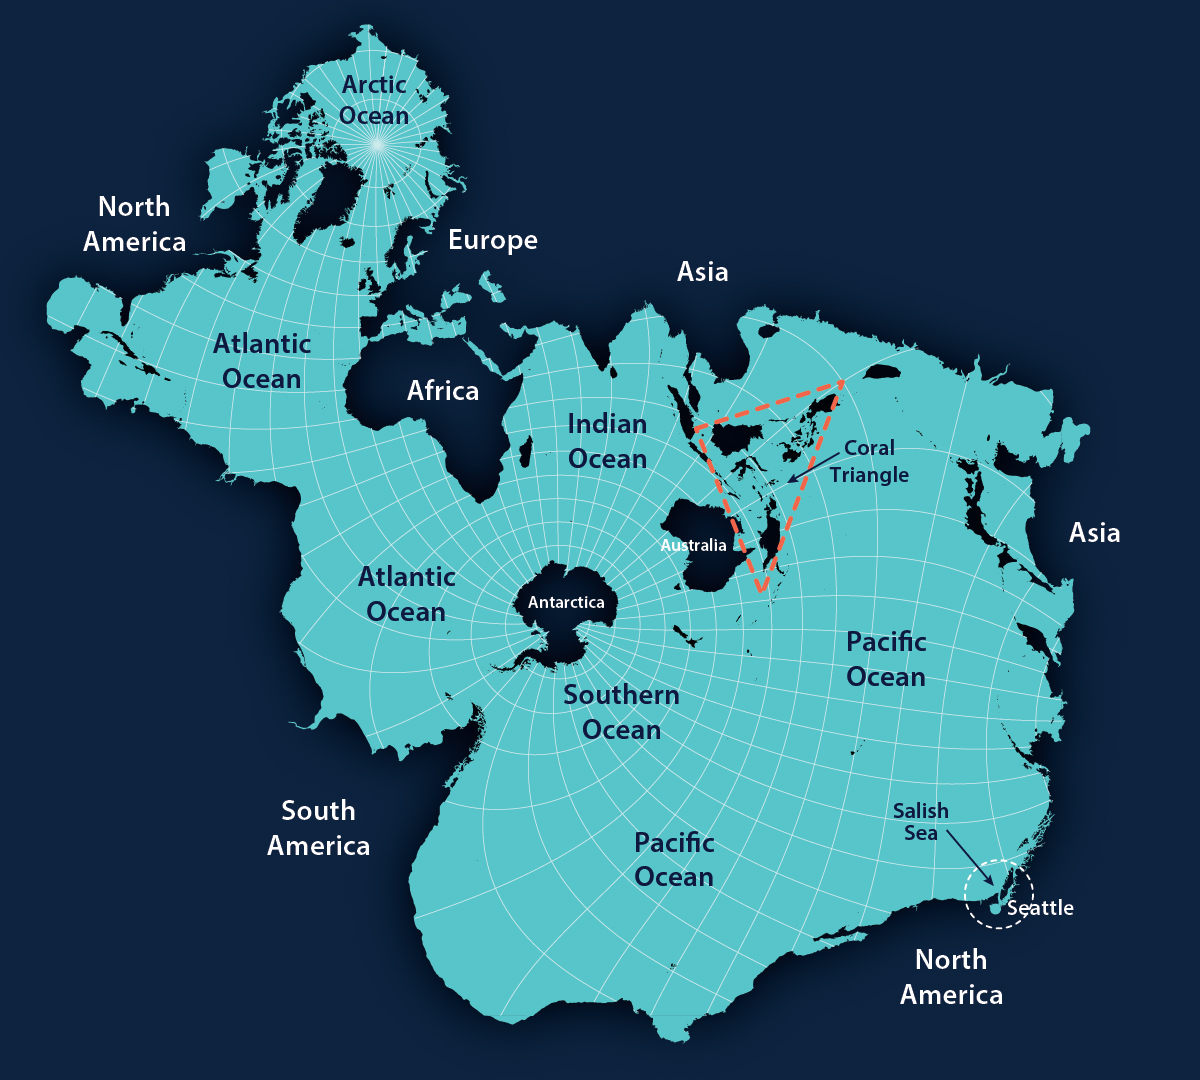 A map of the world with Antarctica at its center; the ocean, rather than continents, is highlighted. Seattle's location in the bottom right corner of the map is circled and labeled "Salish Sea." The Coral Triangle, a region of the ocean encompassing the Philippines, Indonesia, Malaysia, Papua New Guinea, the Solomon Islands and Timor-Leste is outlined in an orange triangle.